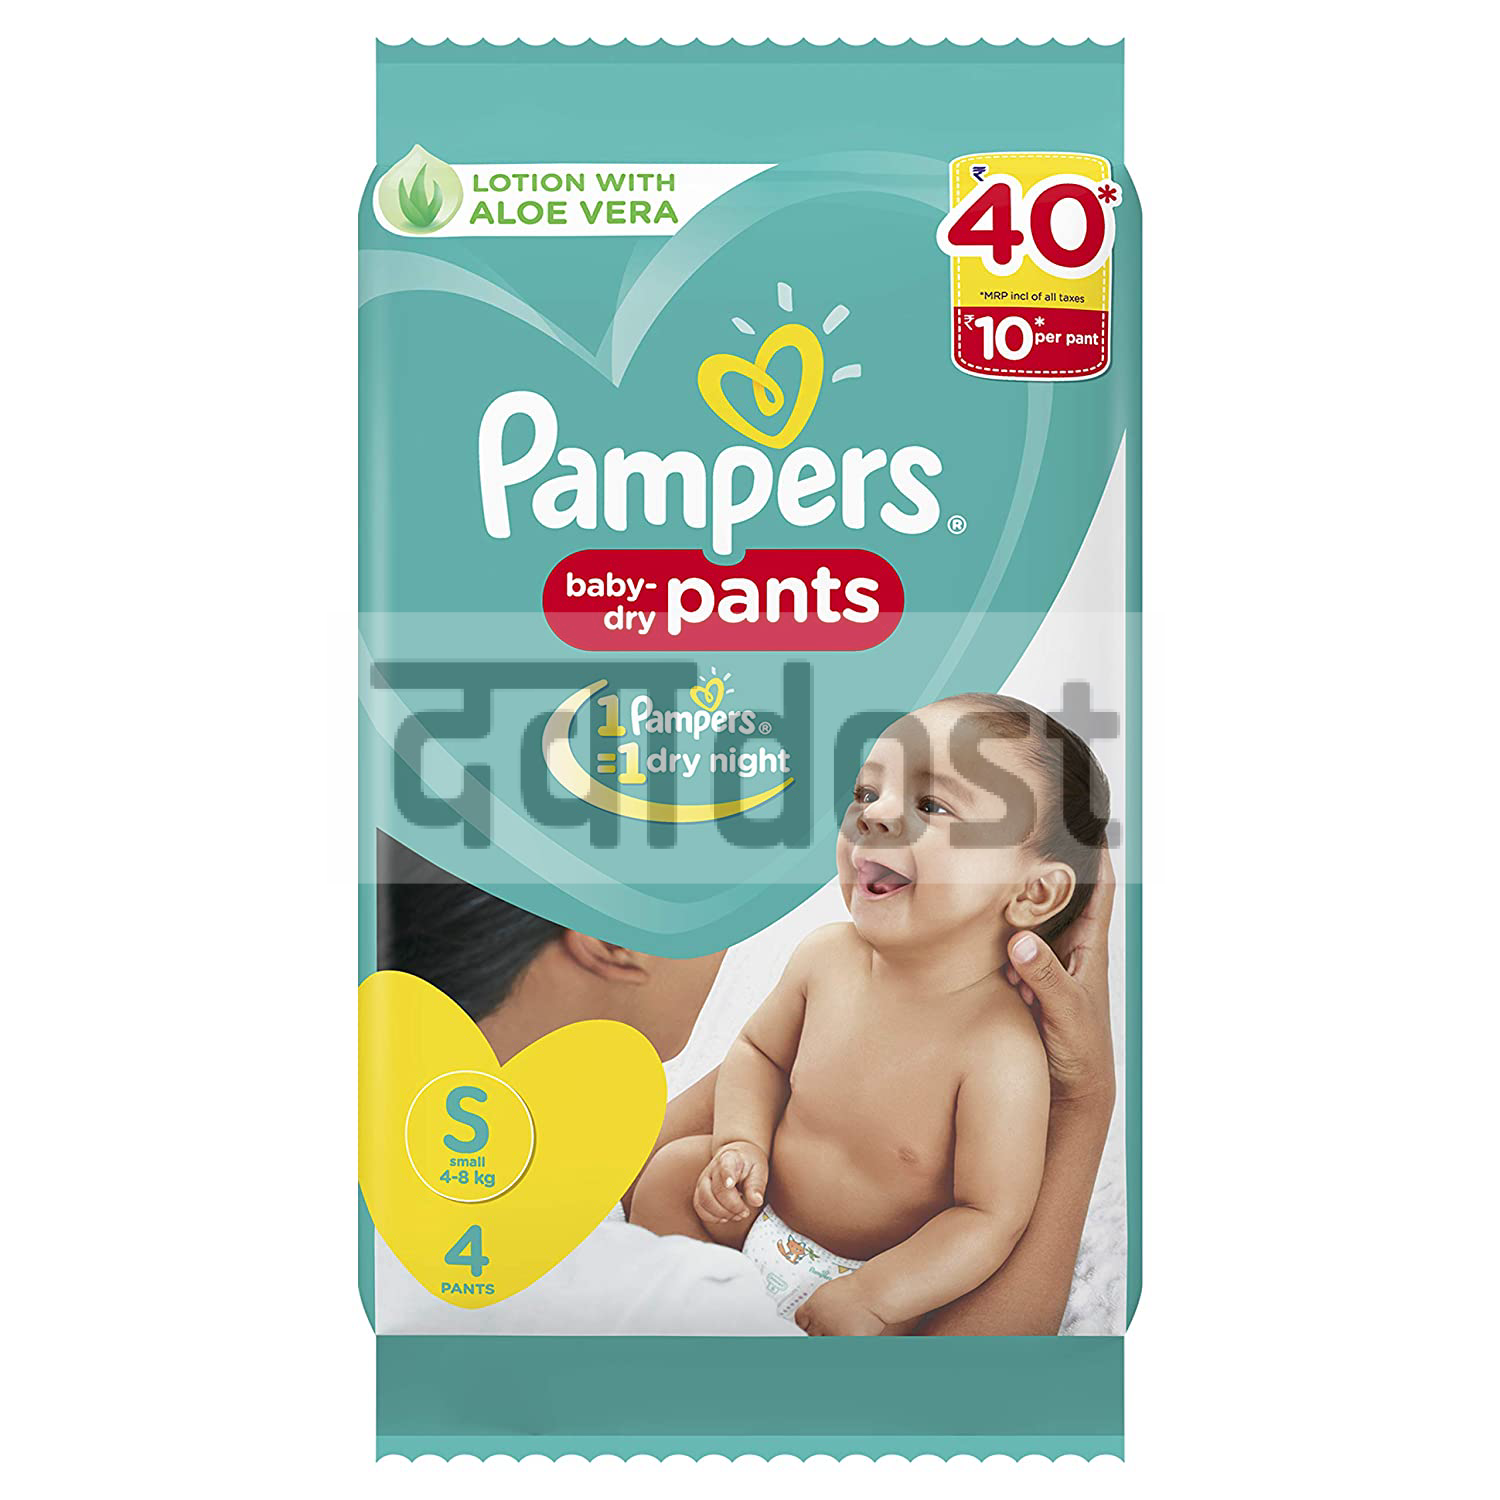 Pampers All round Protection Pants Large size baby diapers LG